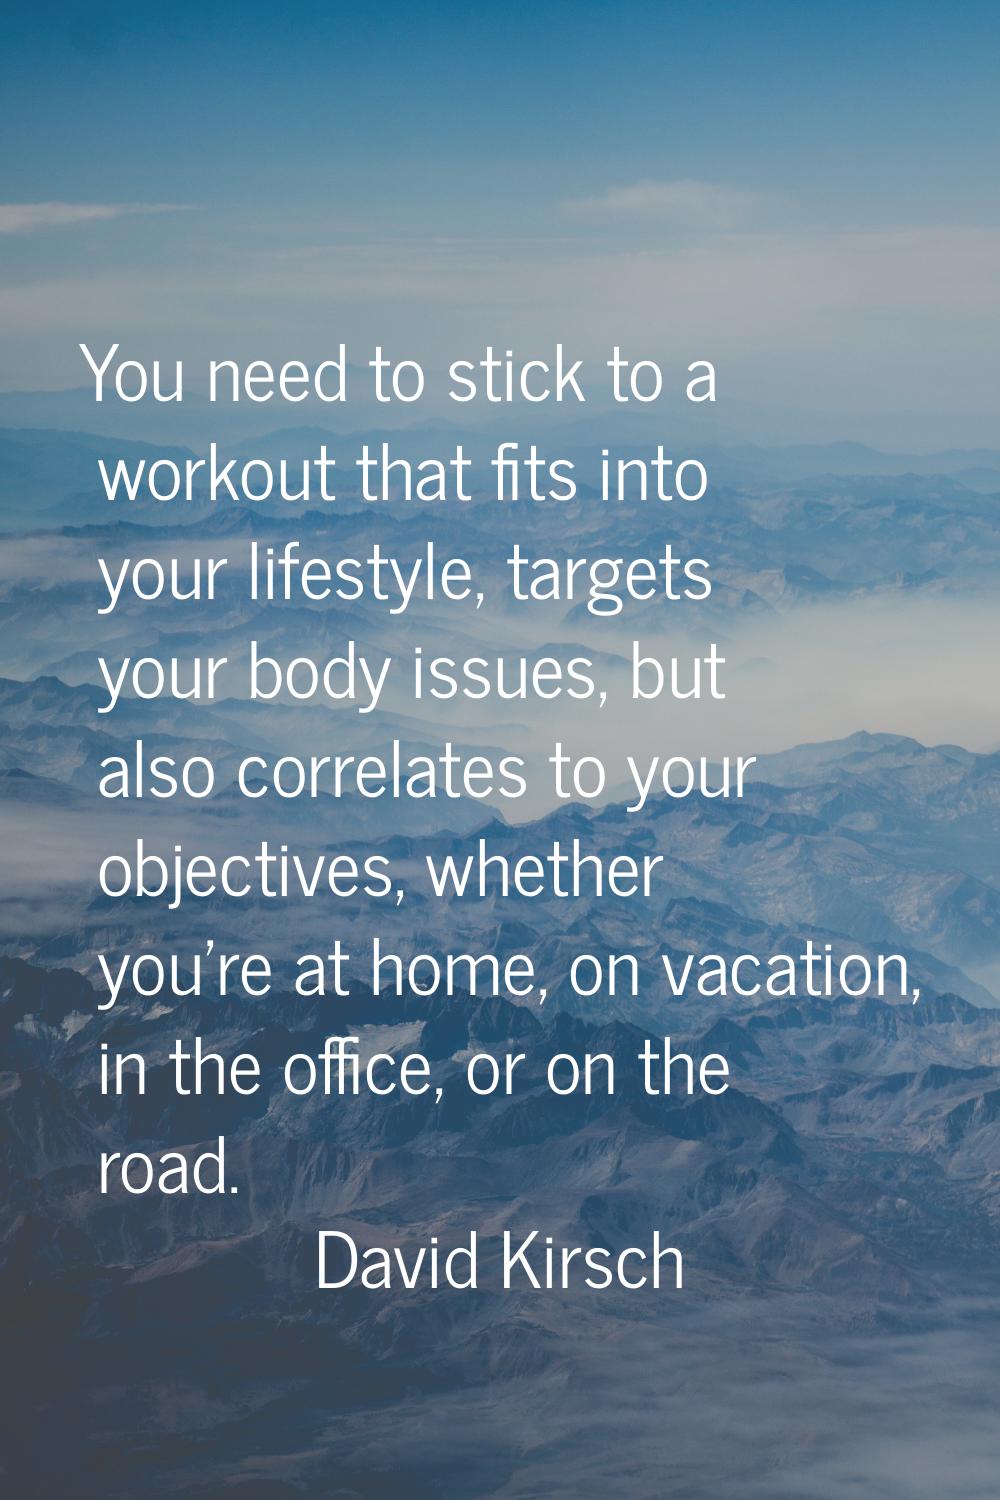 You need to stick to a workout that fits into your lifestyle, targets your body issues, but also co